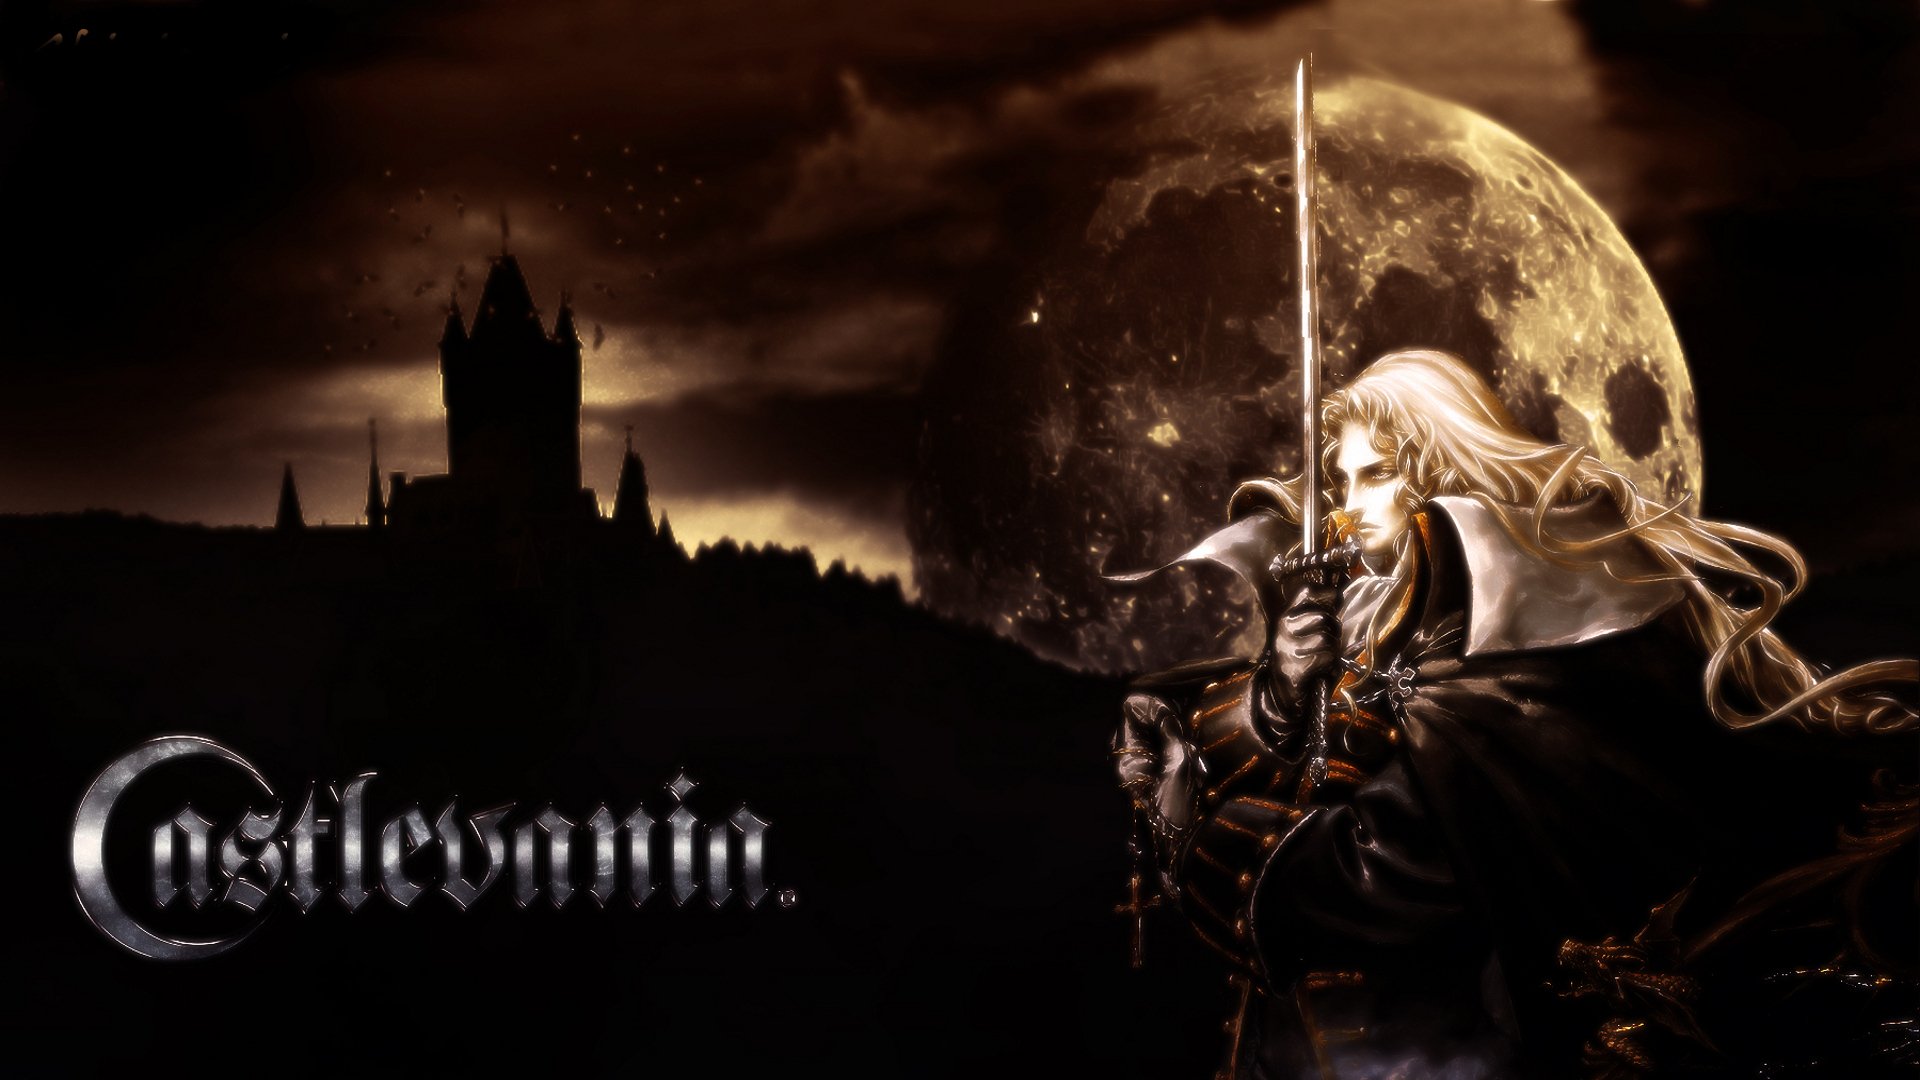 General 1920x1080 Castlevania Castlevania: Symphony of the Night video games sword video game art Alucard Tepes